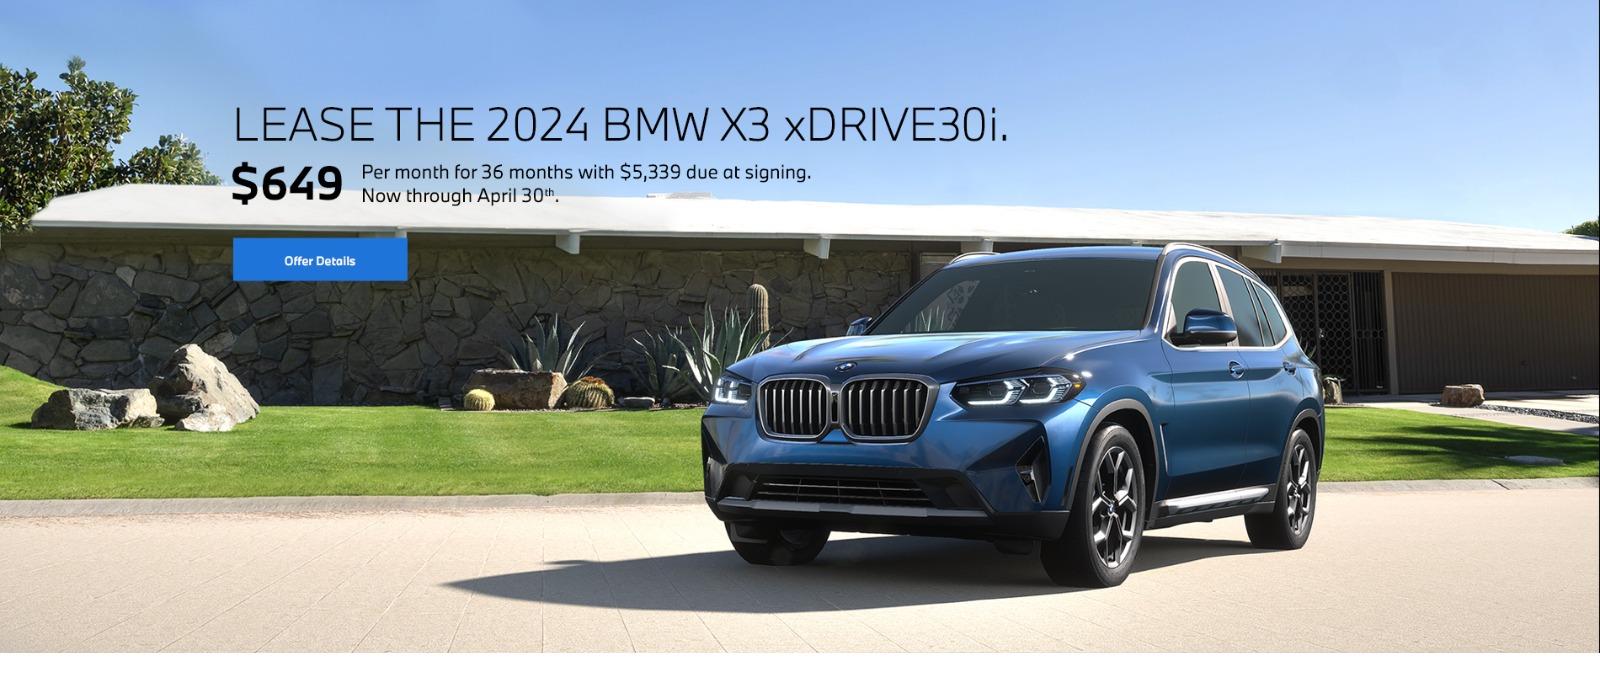 BMW X3 xDrive30i lease for $649 per month for 36 months